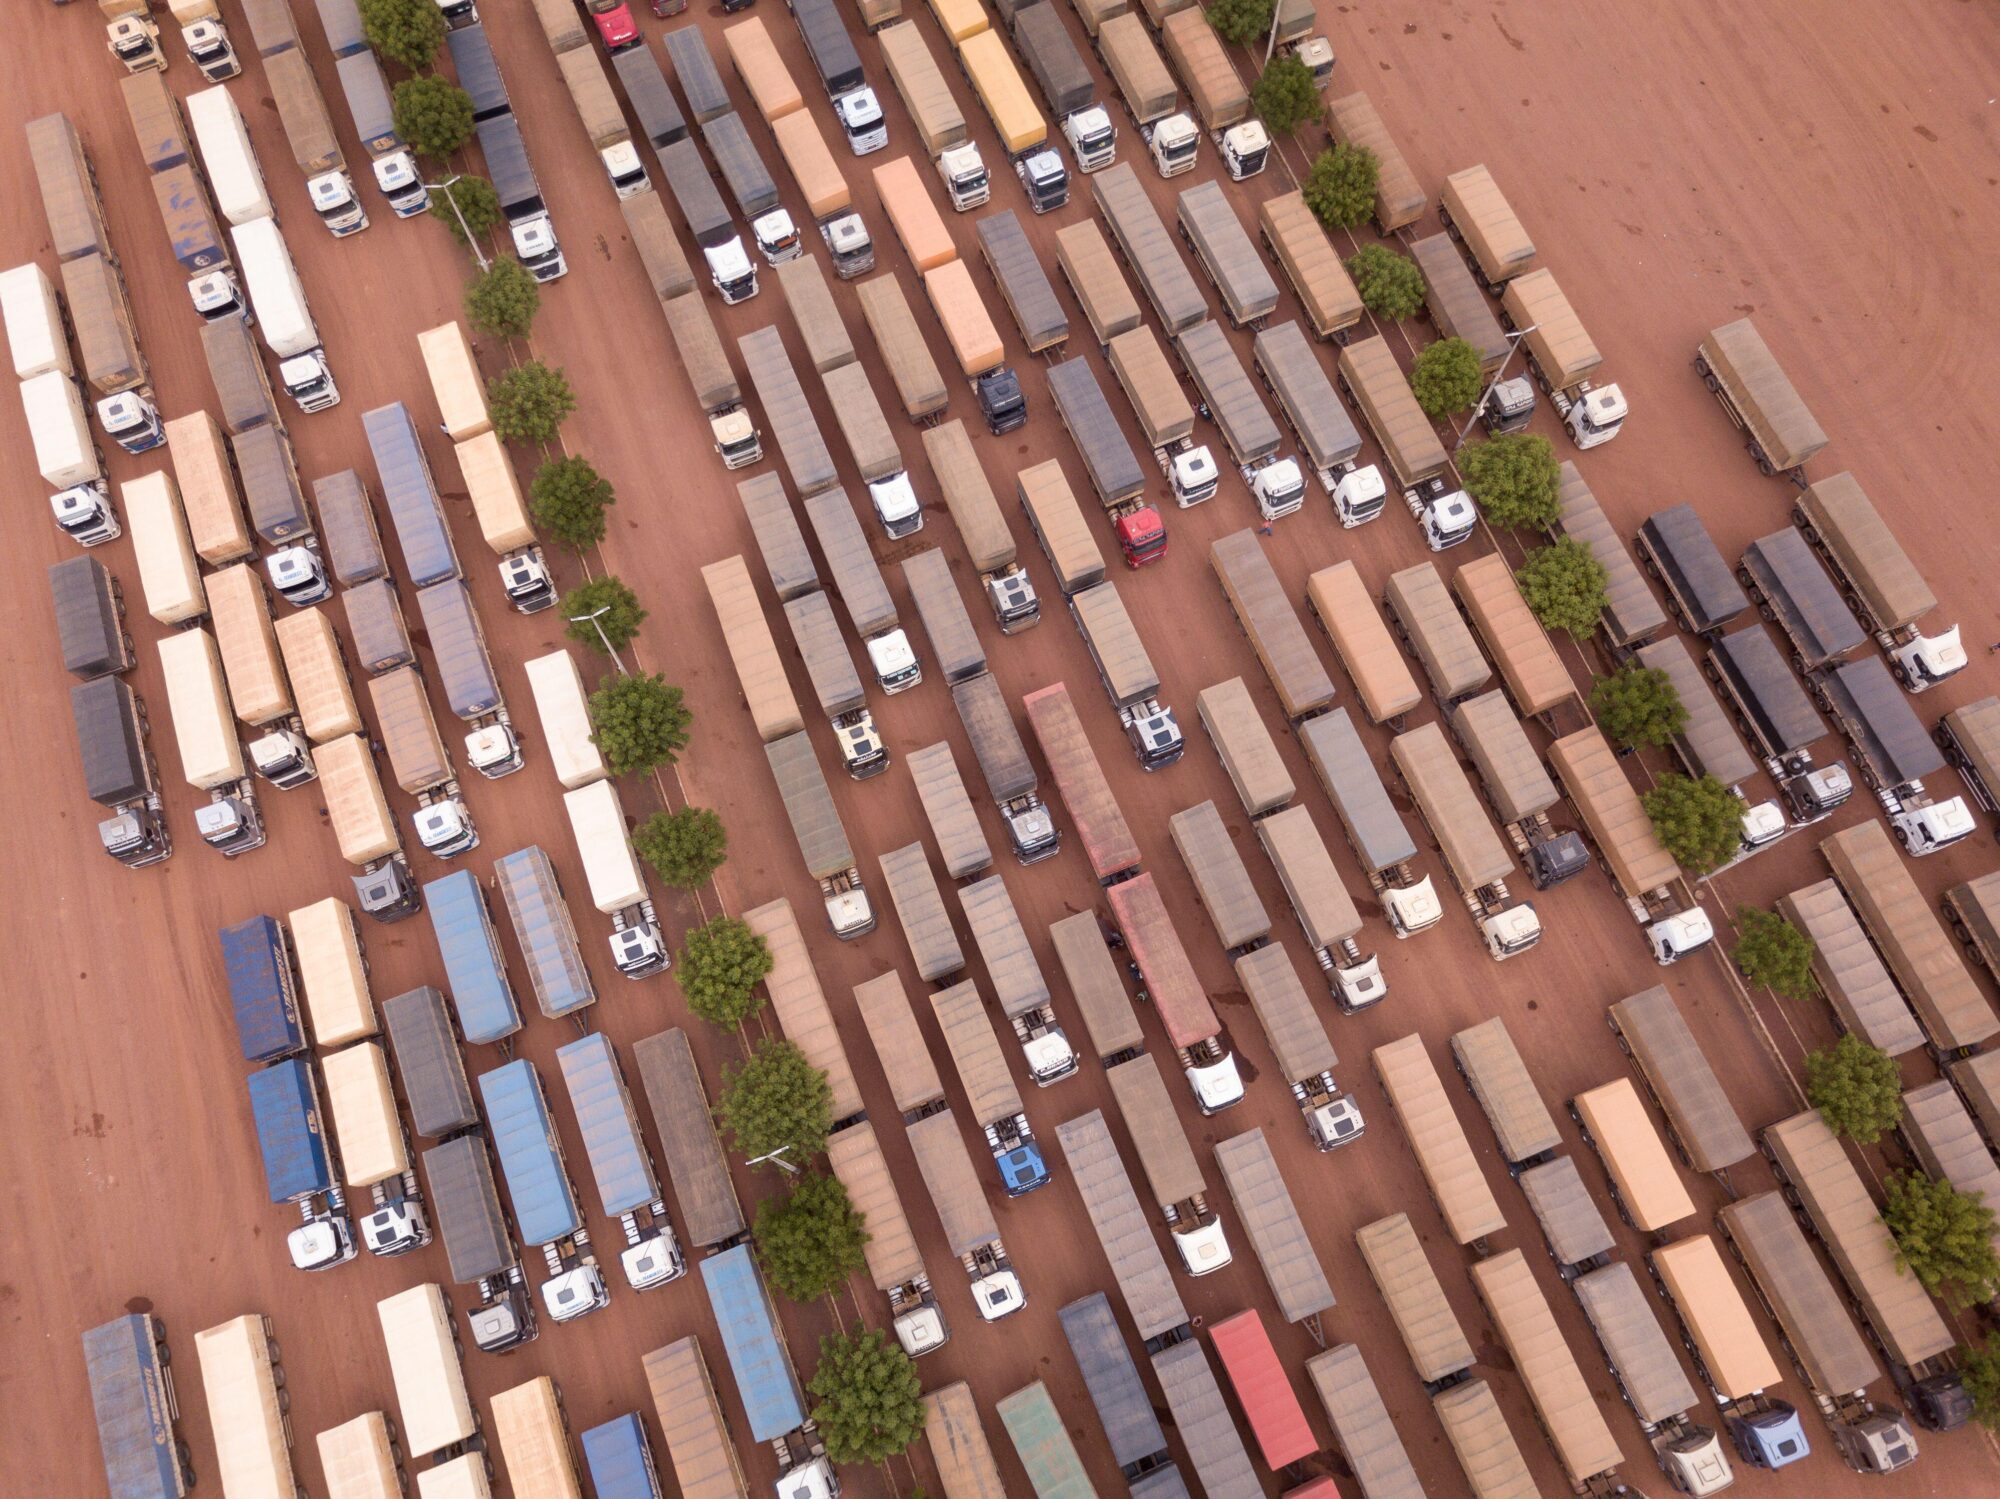 <p>Lorries carrying soybeans queue along Brazil’s BR-163 highway. The Amazon region has become increasingly important for China, for its significant agricultural exports and role in mitigating climate change (Image: Paralaxis / Alamy)</p>